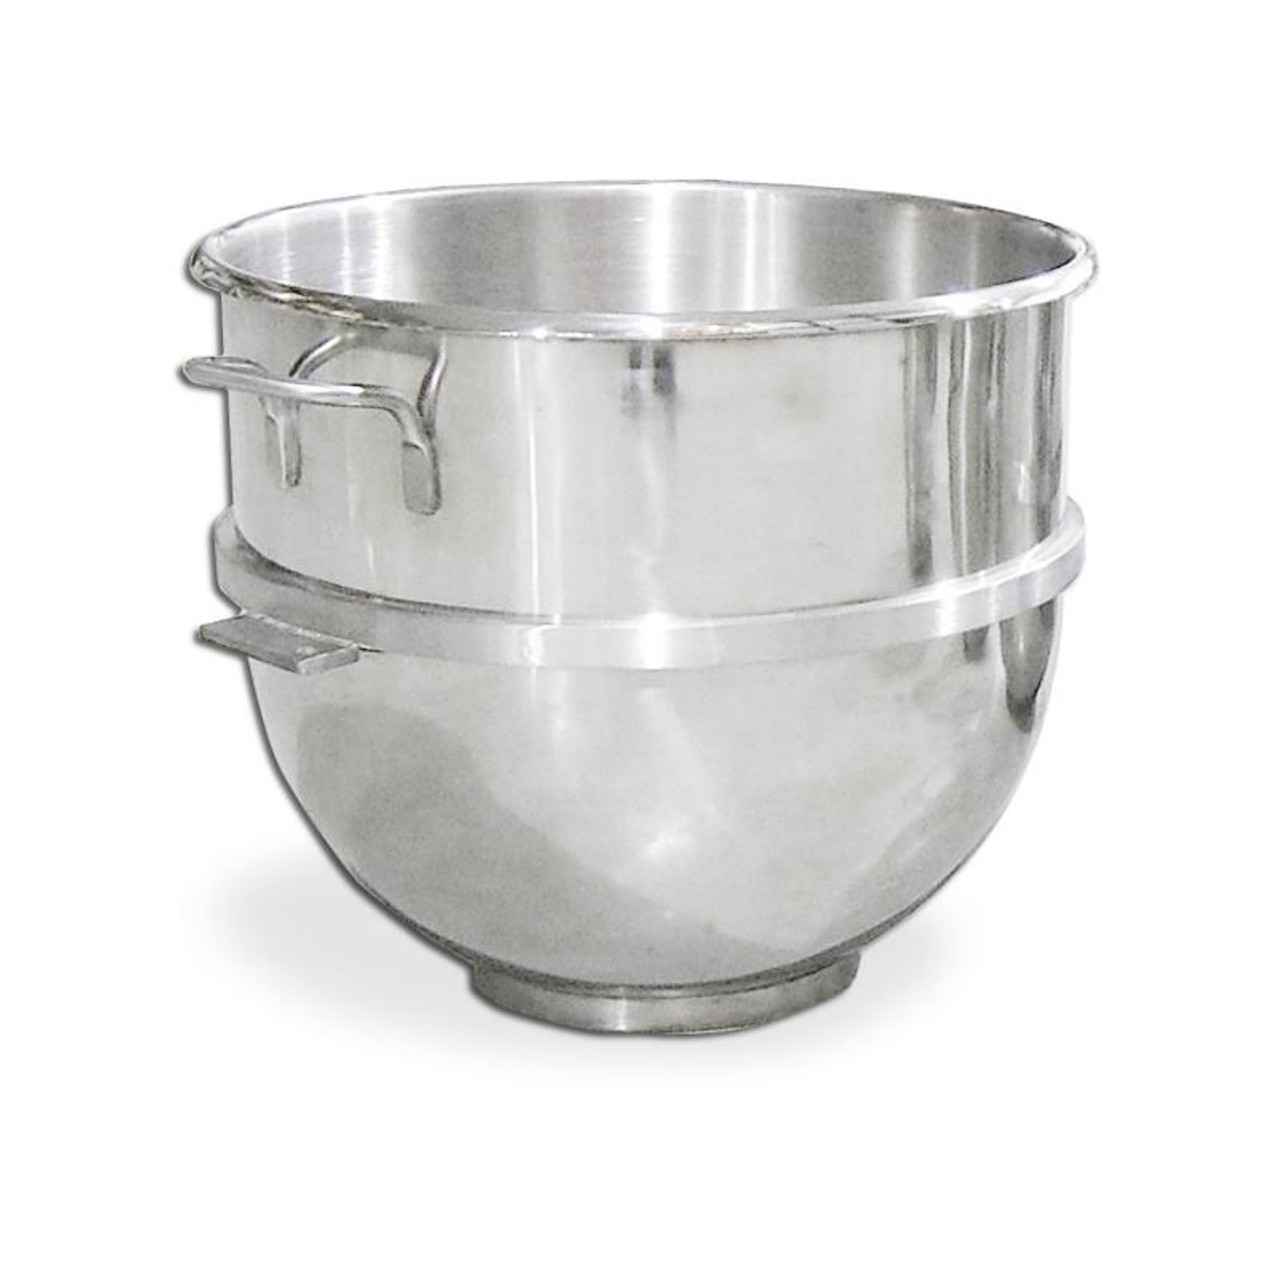 https://cdn11.bigcommerce.com/s-3n1nnt5qyw/images/stencil/1280x1280/products/11594/12982/omcan-fma-mixer-bowl80-qt-stainless-steel-model-14249-15__73953.1629761427.jpg?c=1